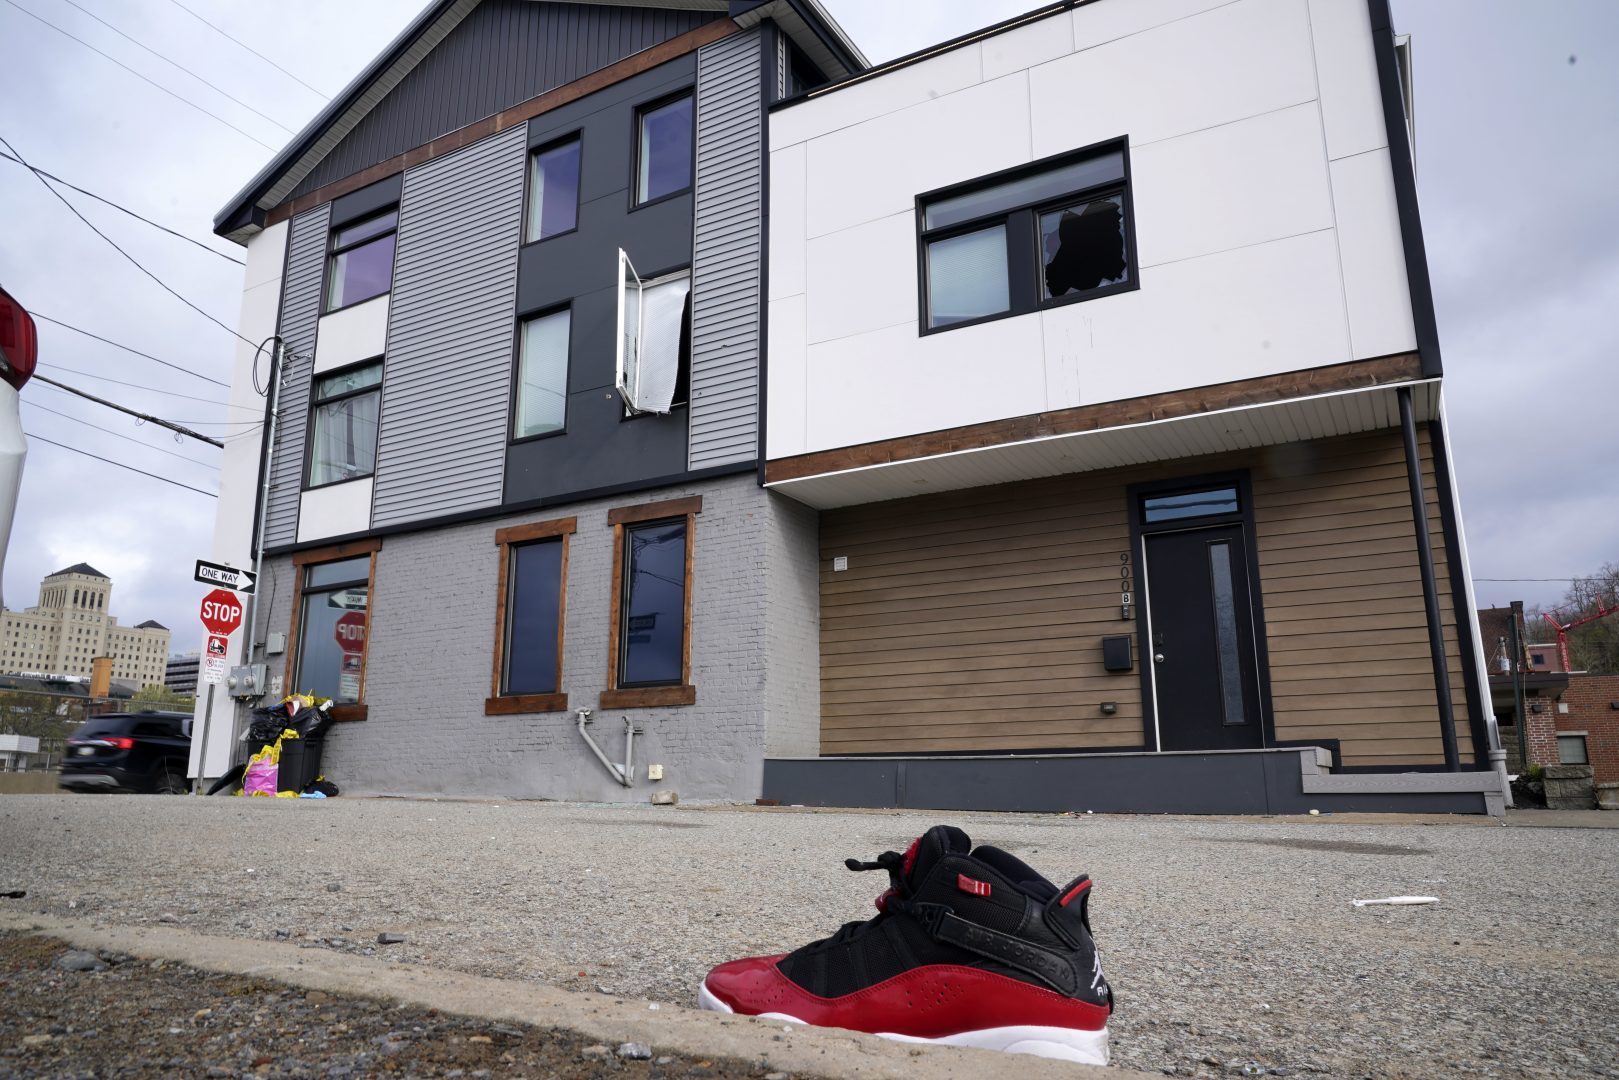 A lone sneaker lies near a short-term rental property where police say a shooting took place in Pittsburgh early Sunday morning, April 17, 2022. The shooting happened around 12:30 a.m. during a party at a short-term rental property where there were more than 200 people inside — many of them underage, Pittsburgh police said in a news release. (AP Photo/Gene J. Puskar)